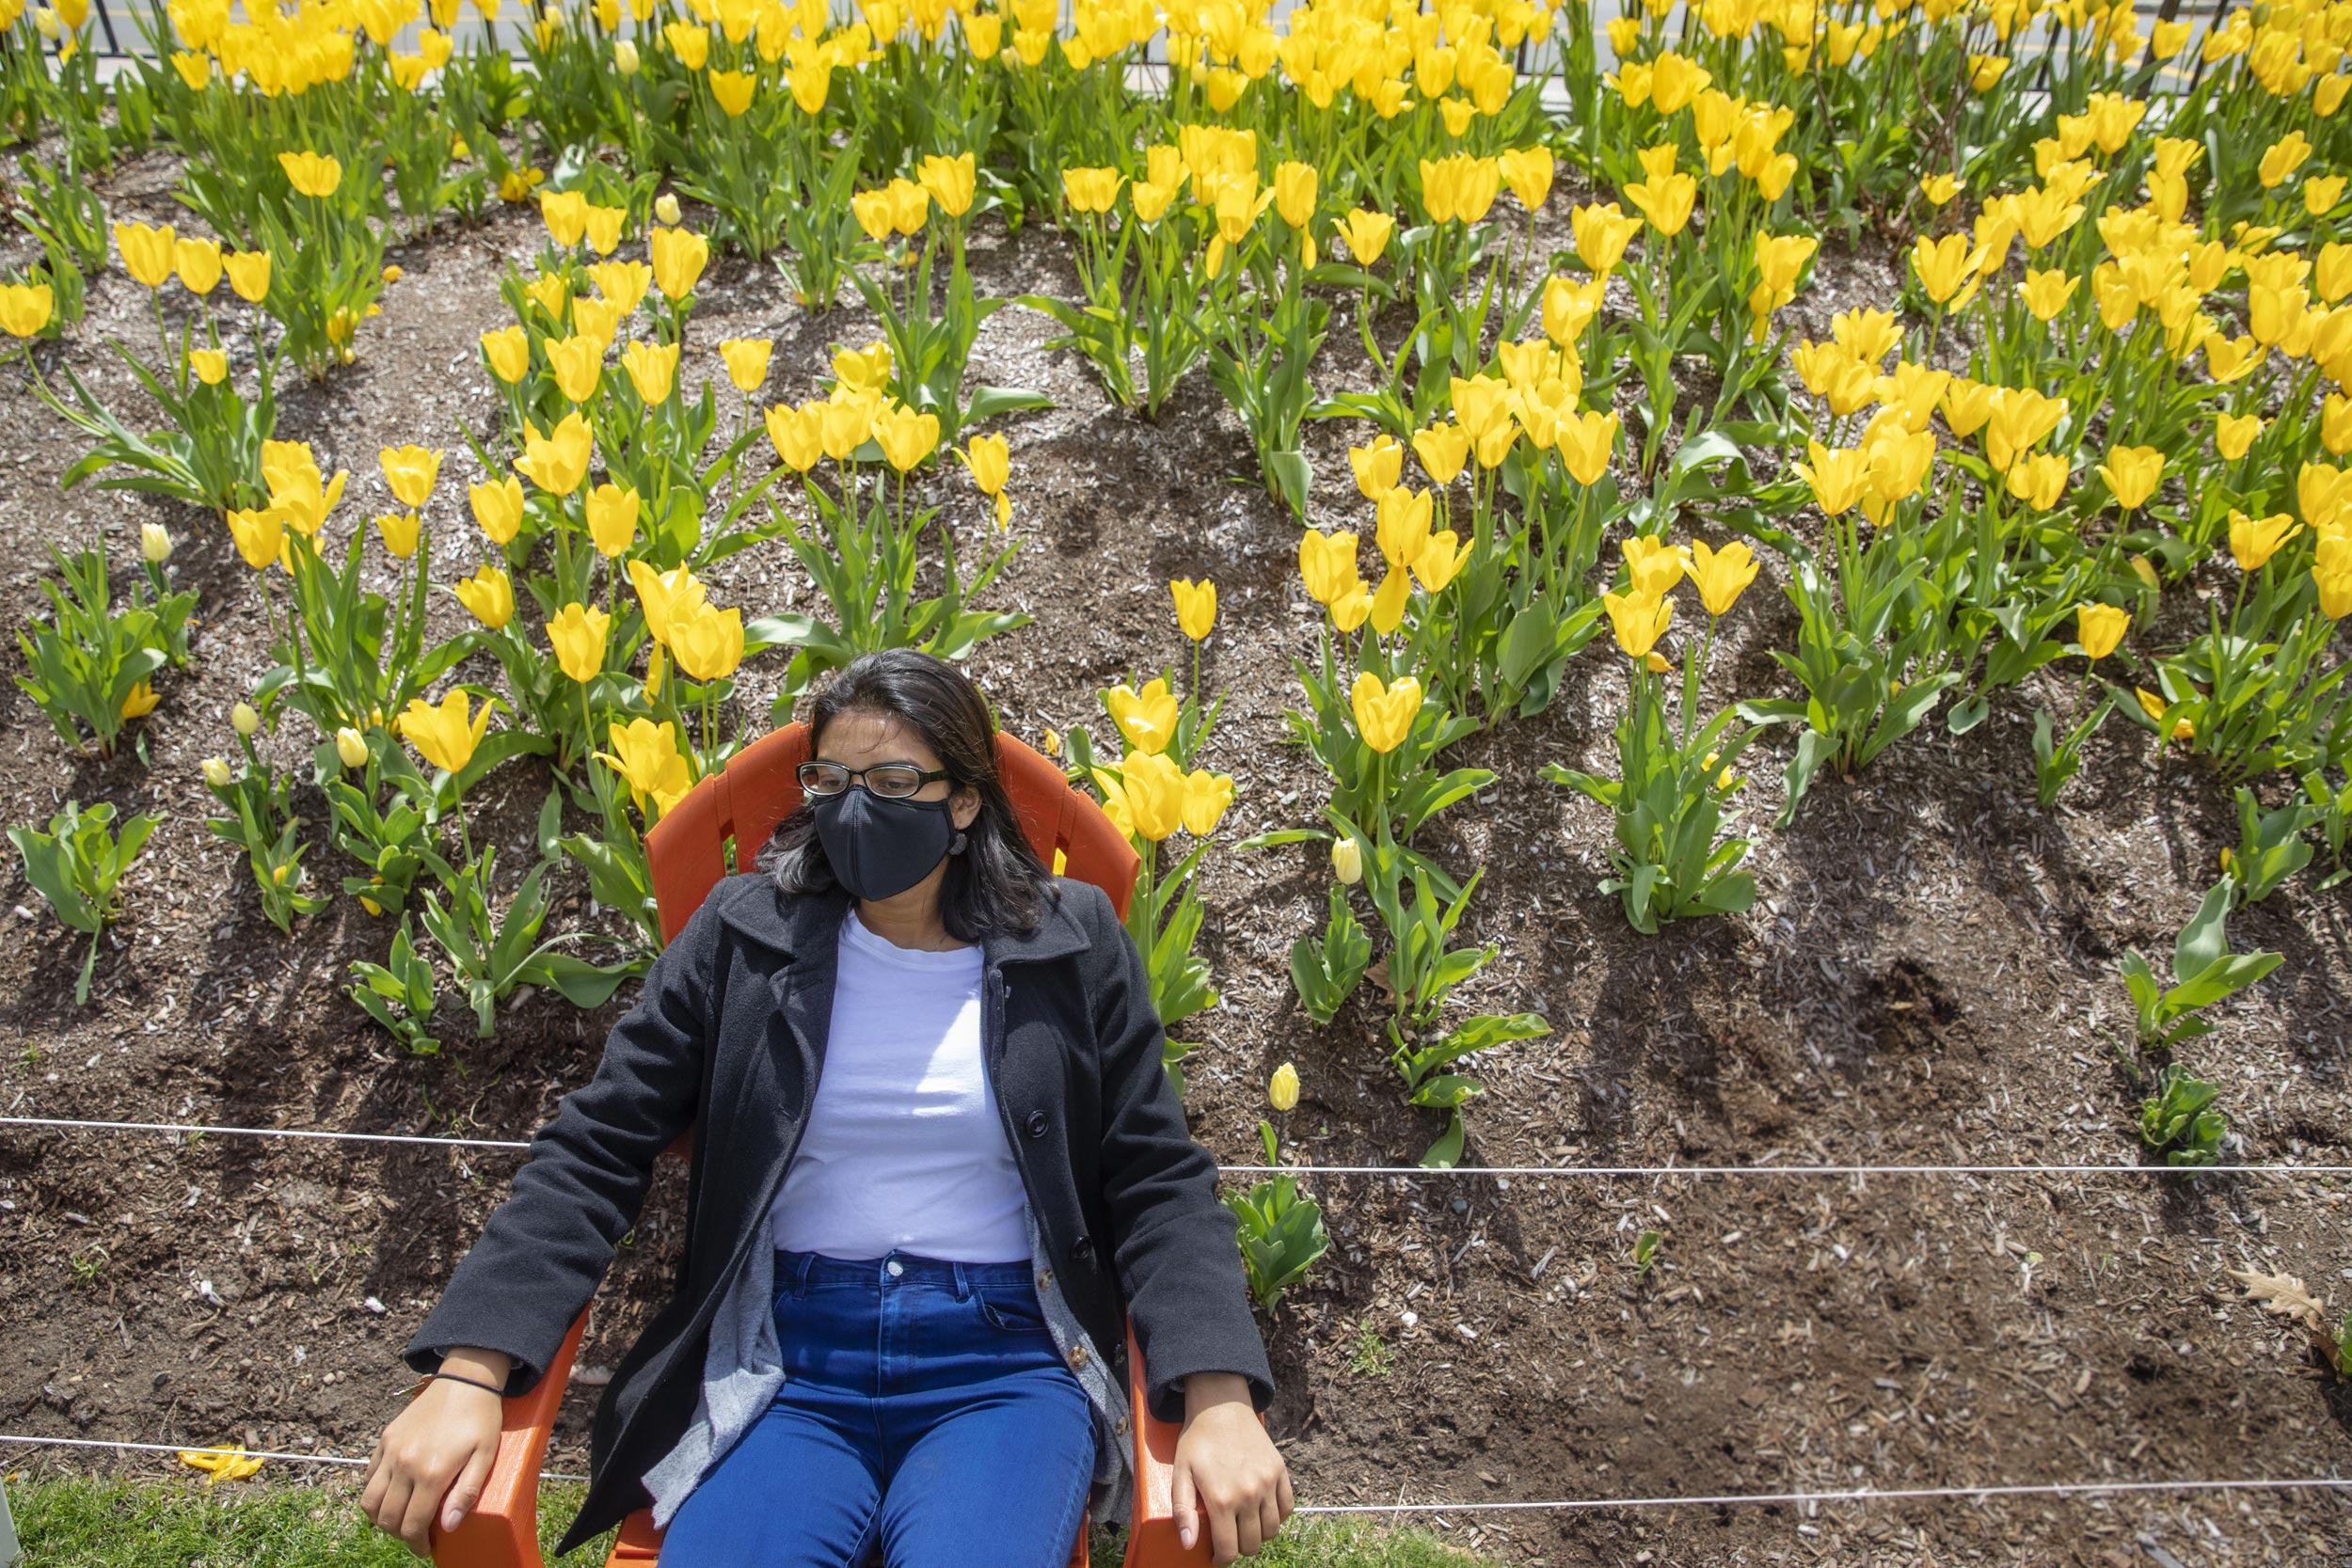 Marisa Sumathipala, '22 relaxes near a bed of daffodils at Leverett House.